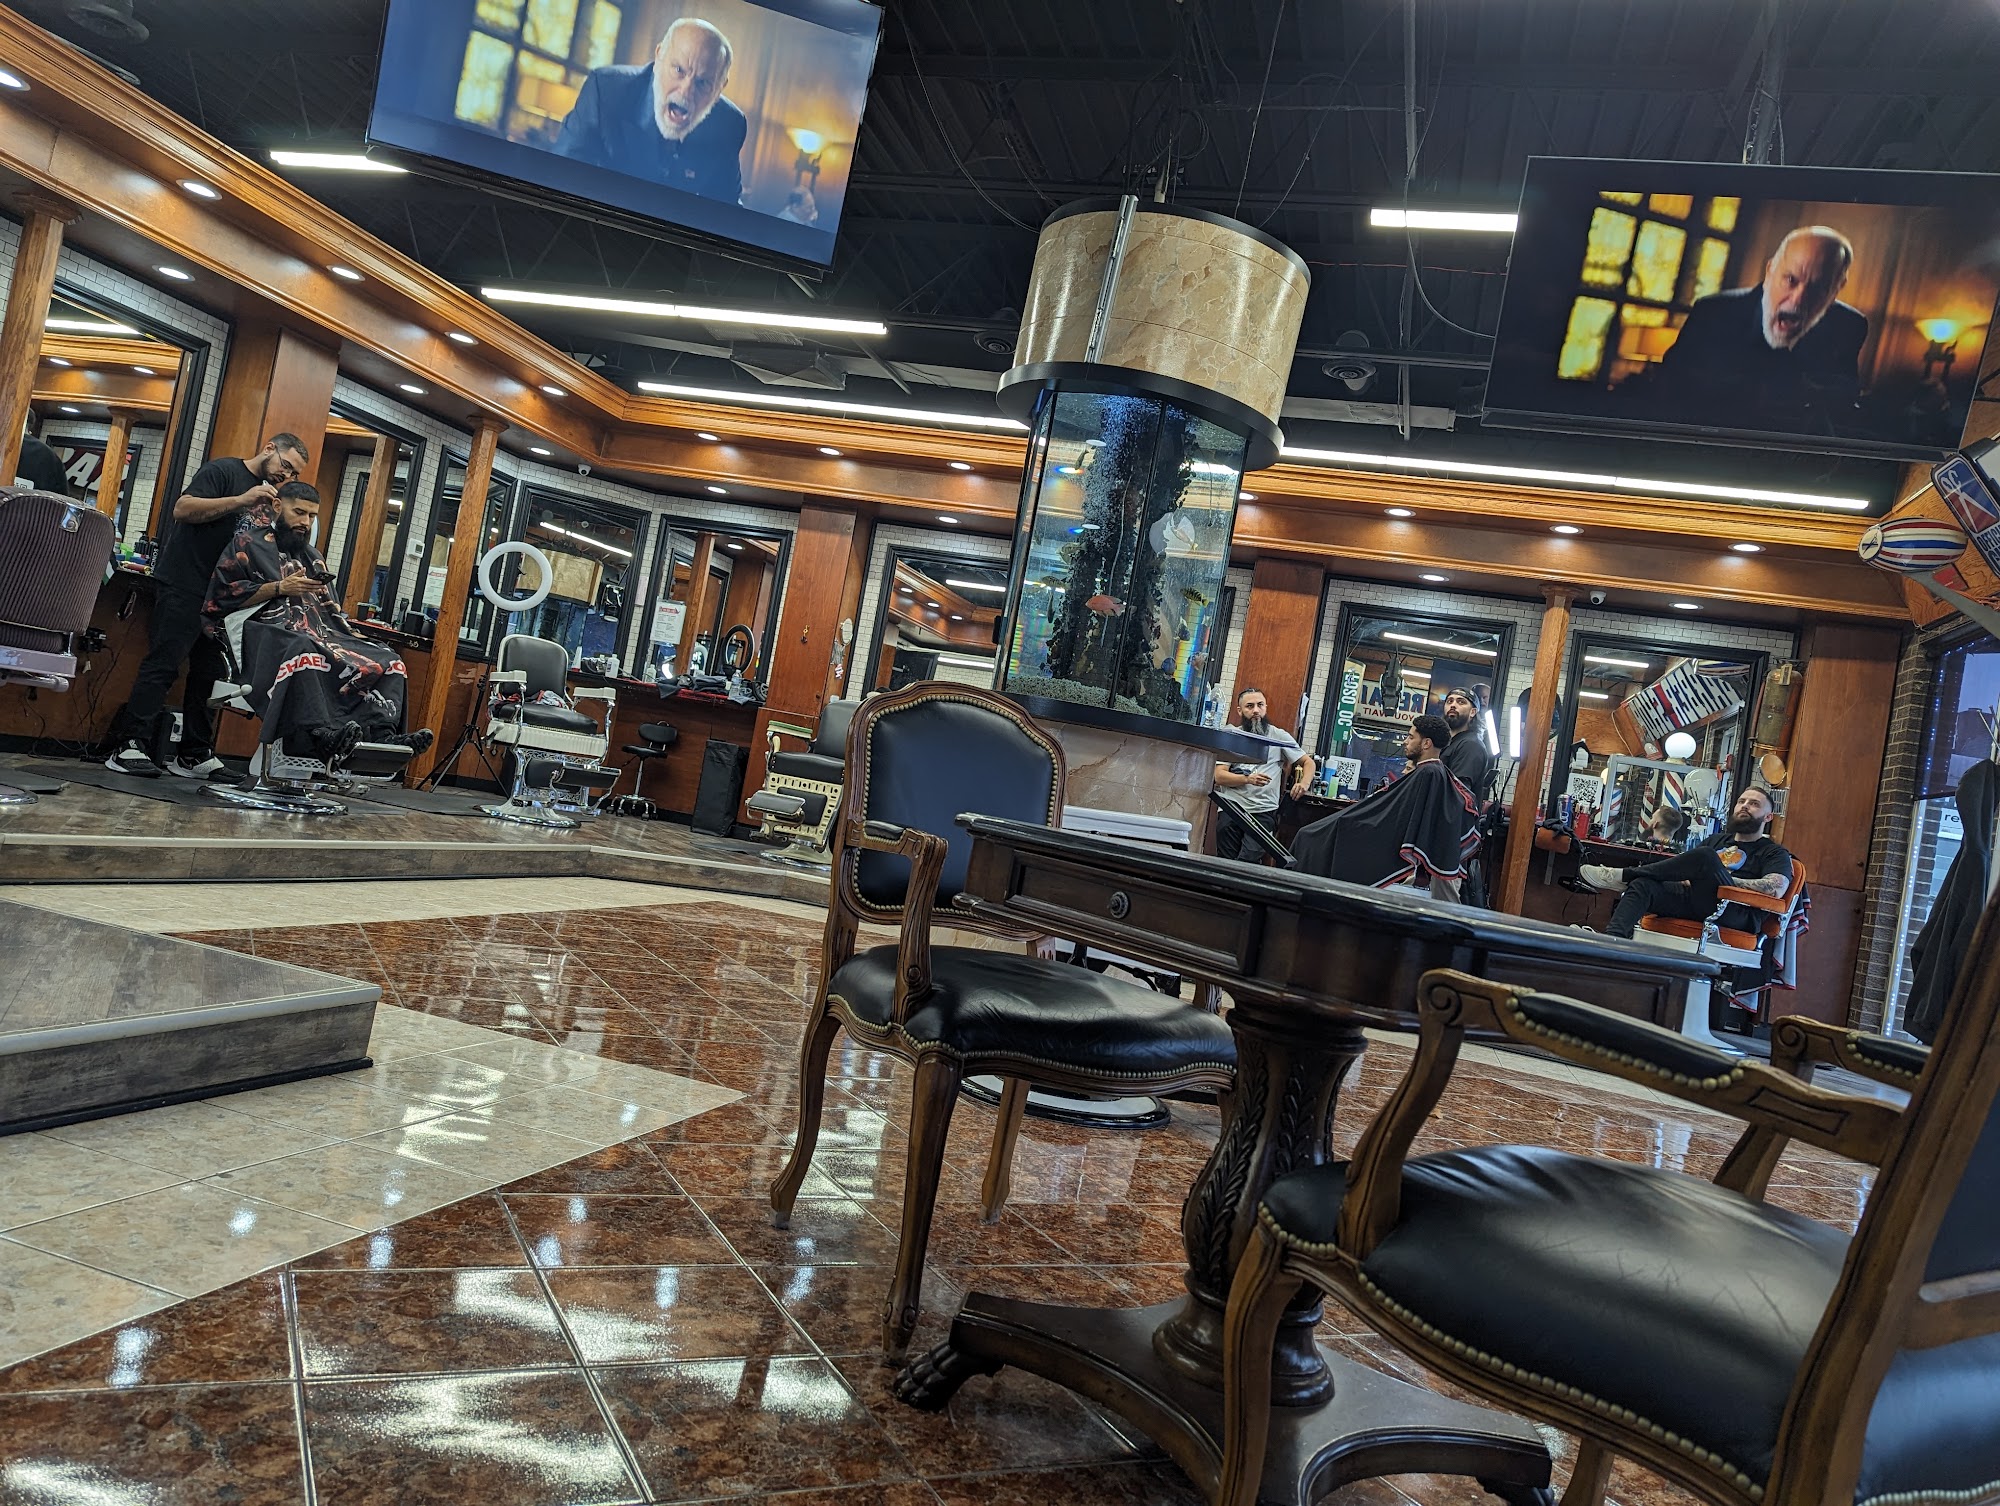 Official Cuts 10500 SW Hwy, Chicago Ridge Illinois 60415